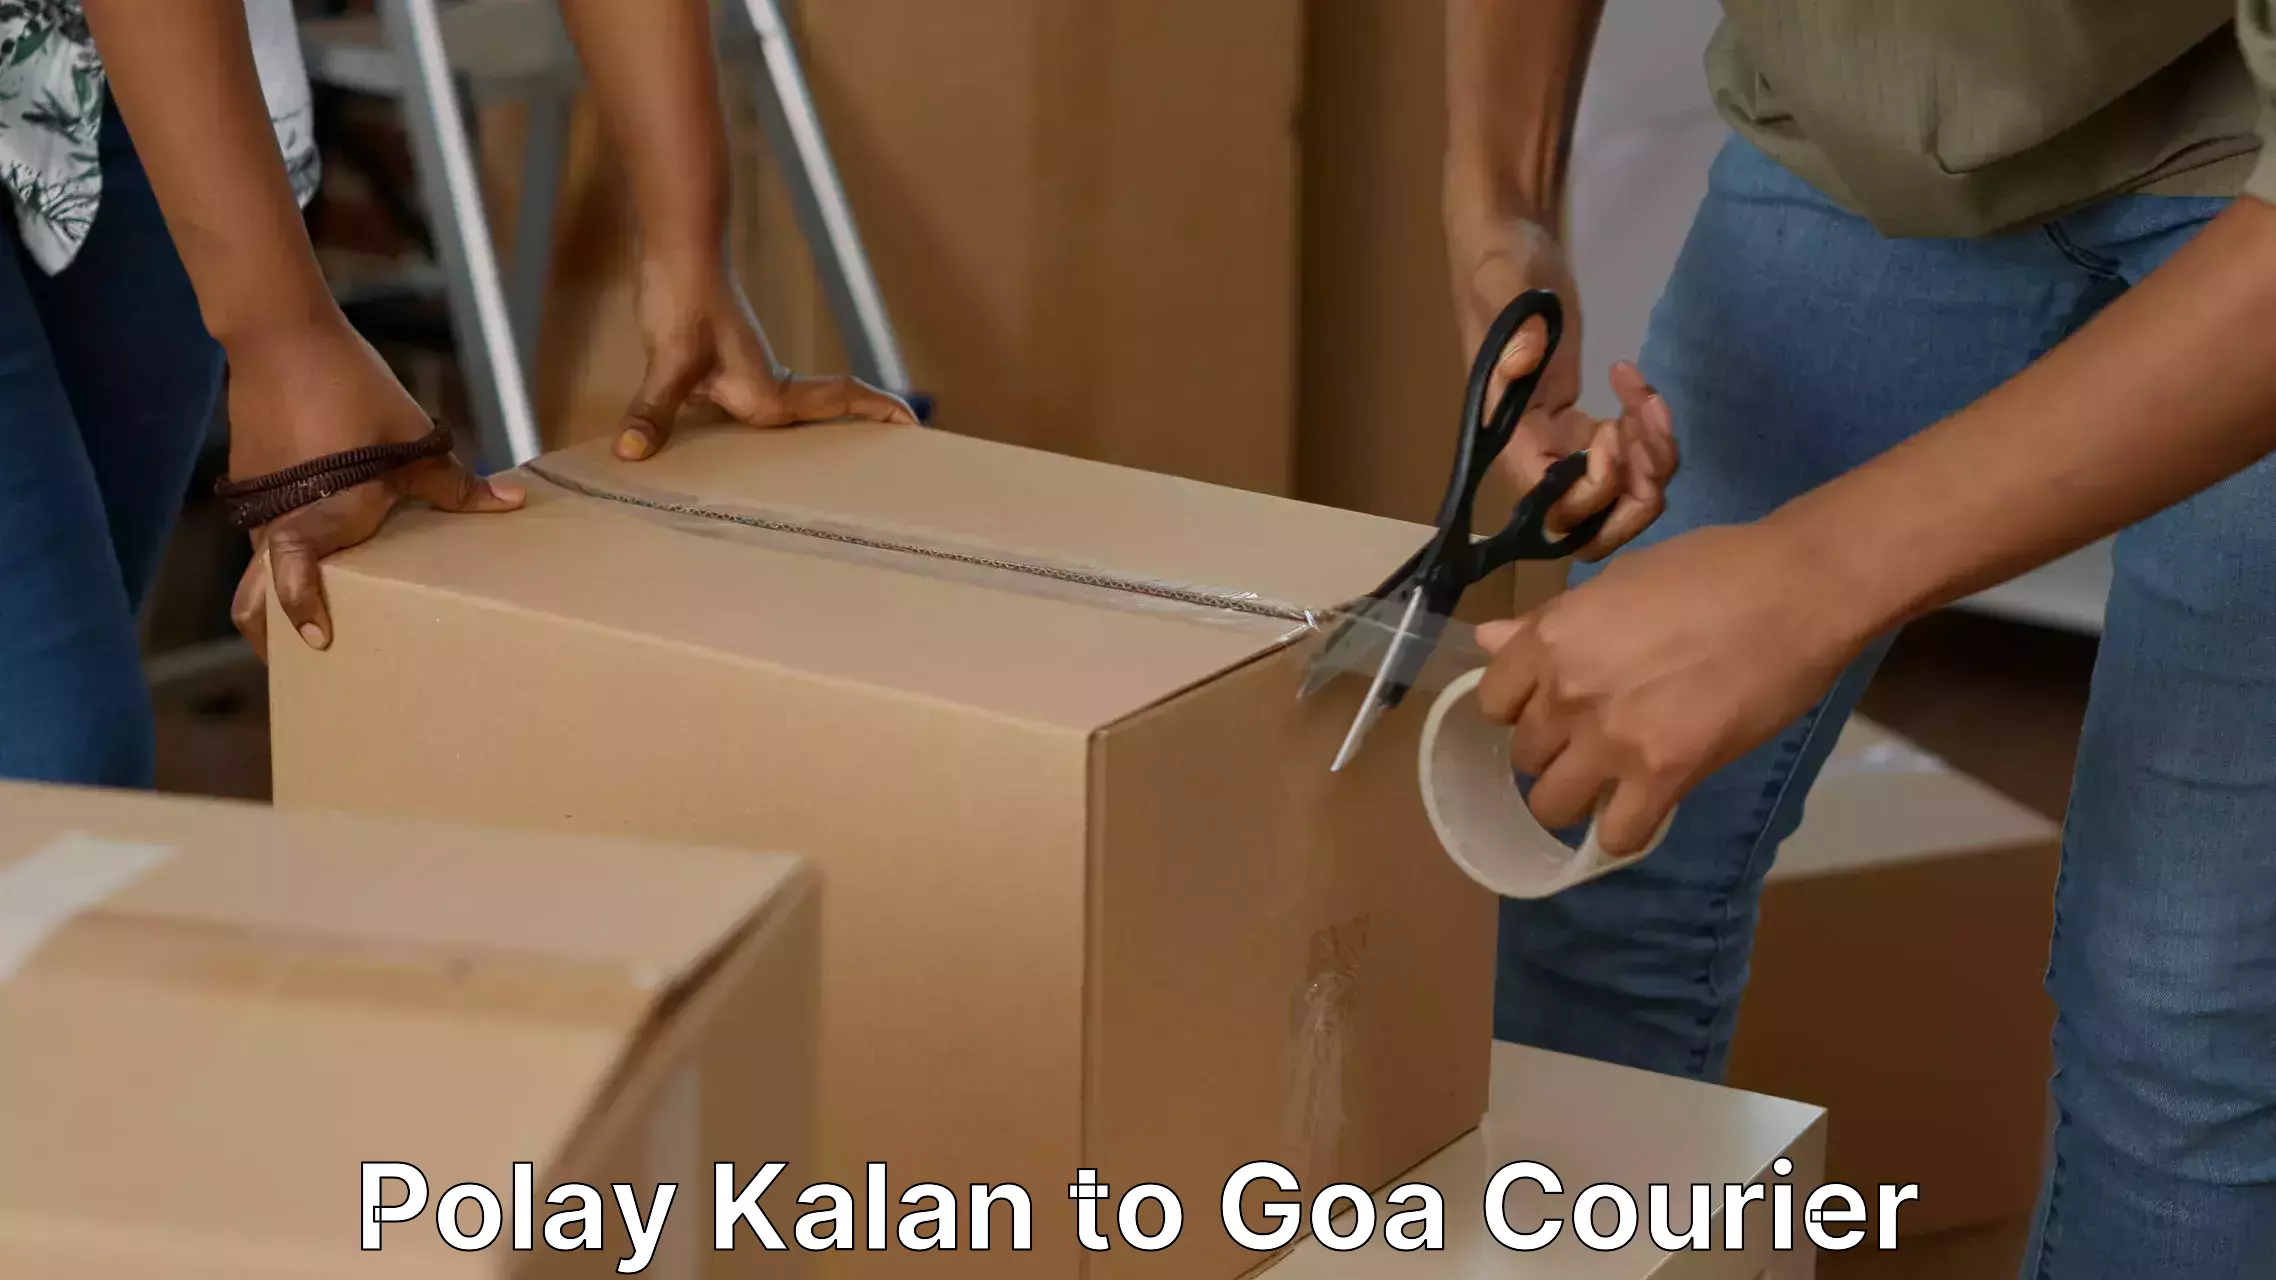 Trusted relocation services Polay Kalan to Goa